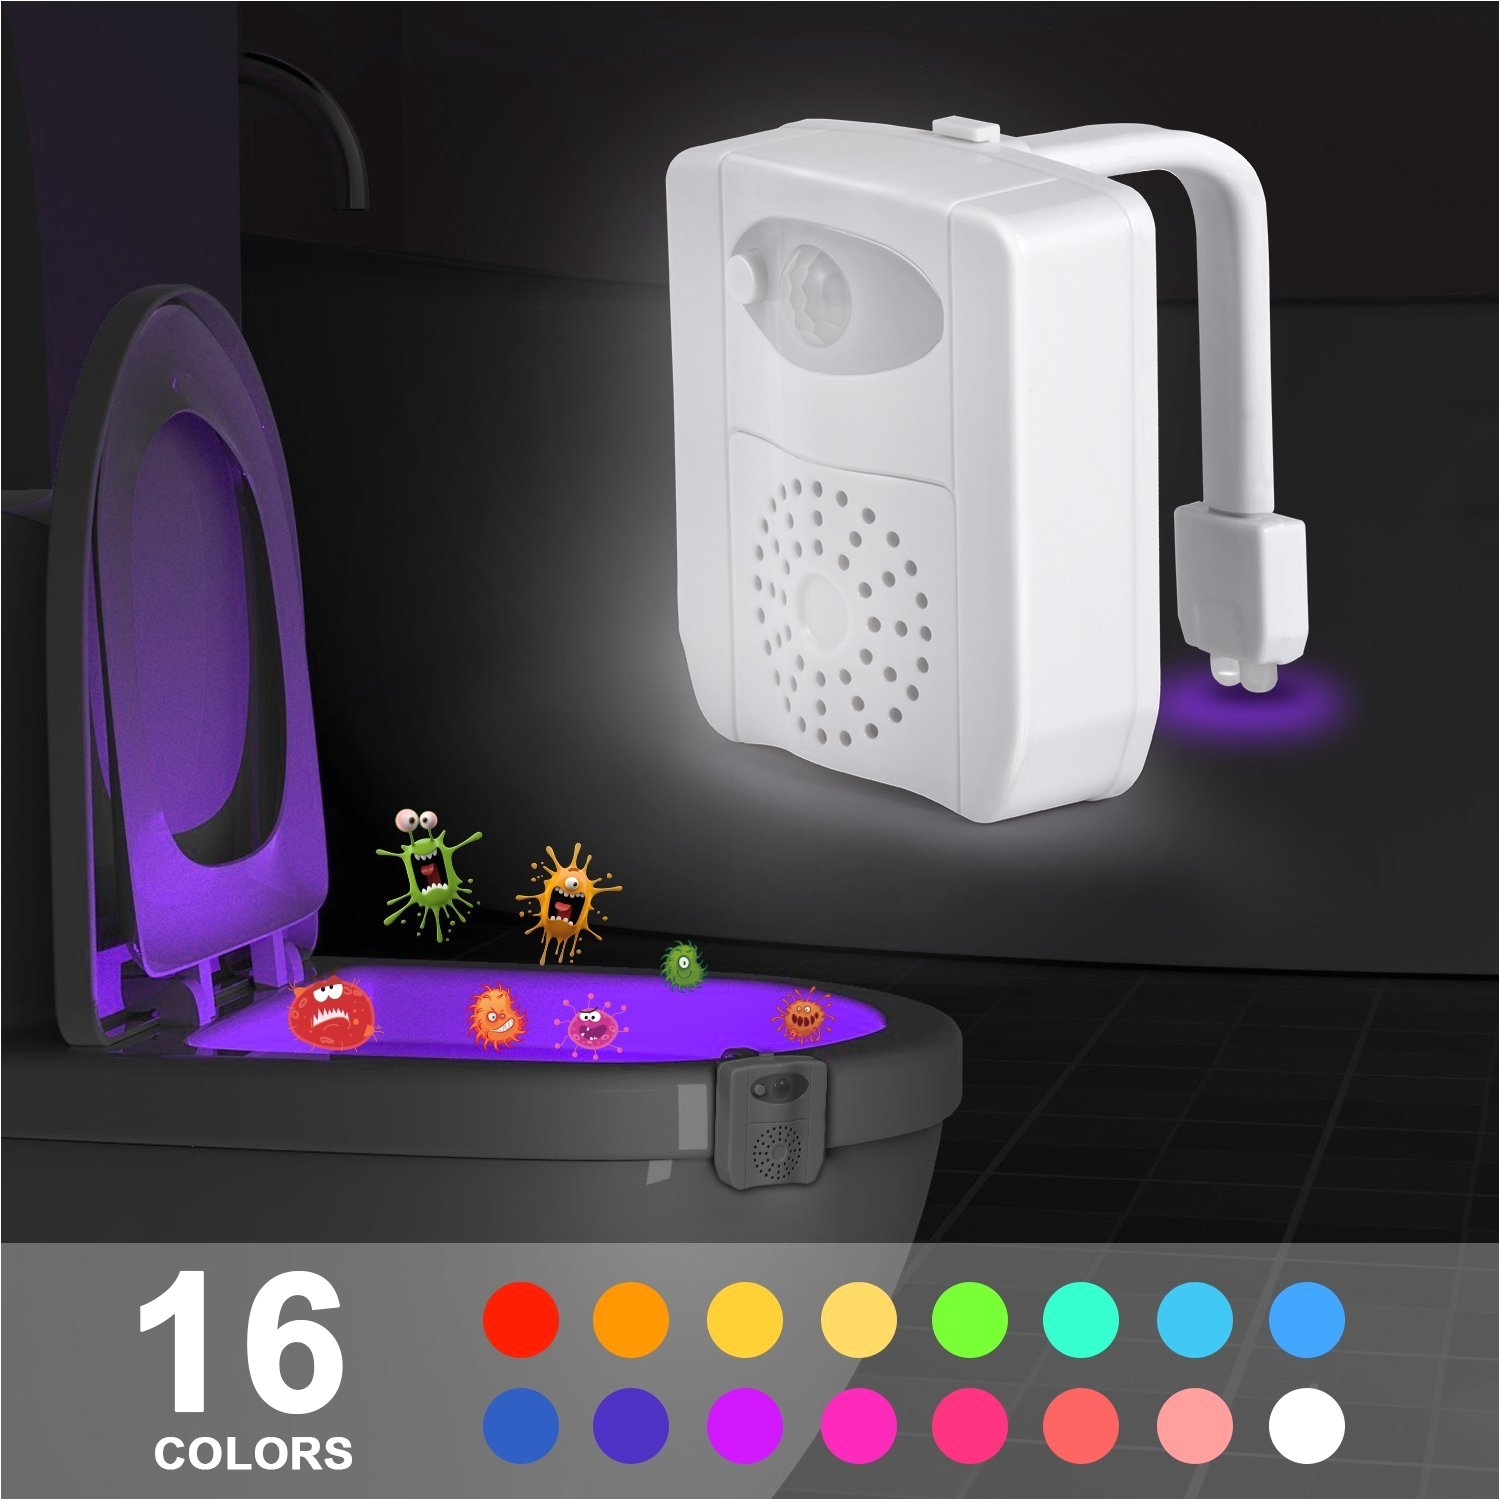 aliexpress com buy motion activated toilet night light led toilet seat nightlight 16 colors motion sensor toilet bowl light with uv sterilizer from